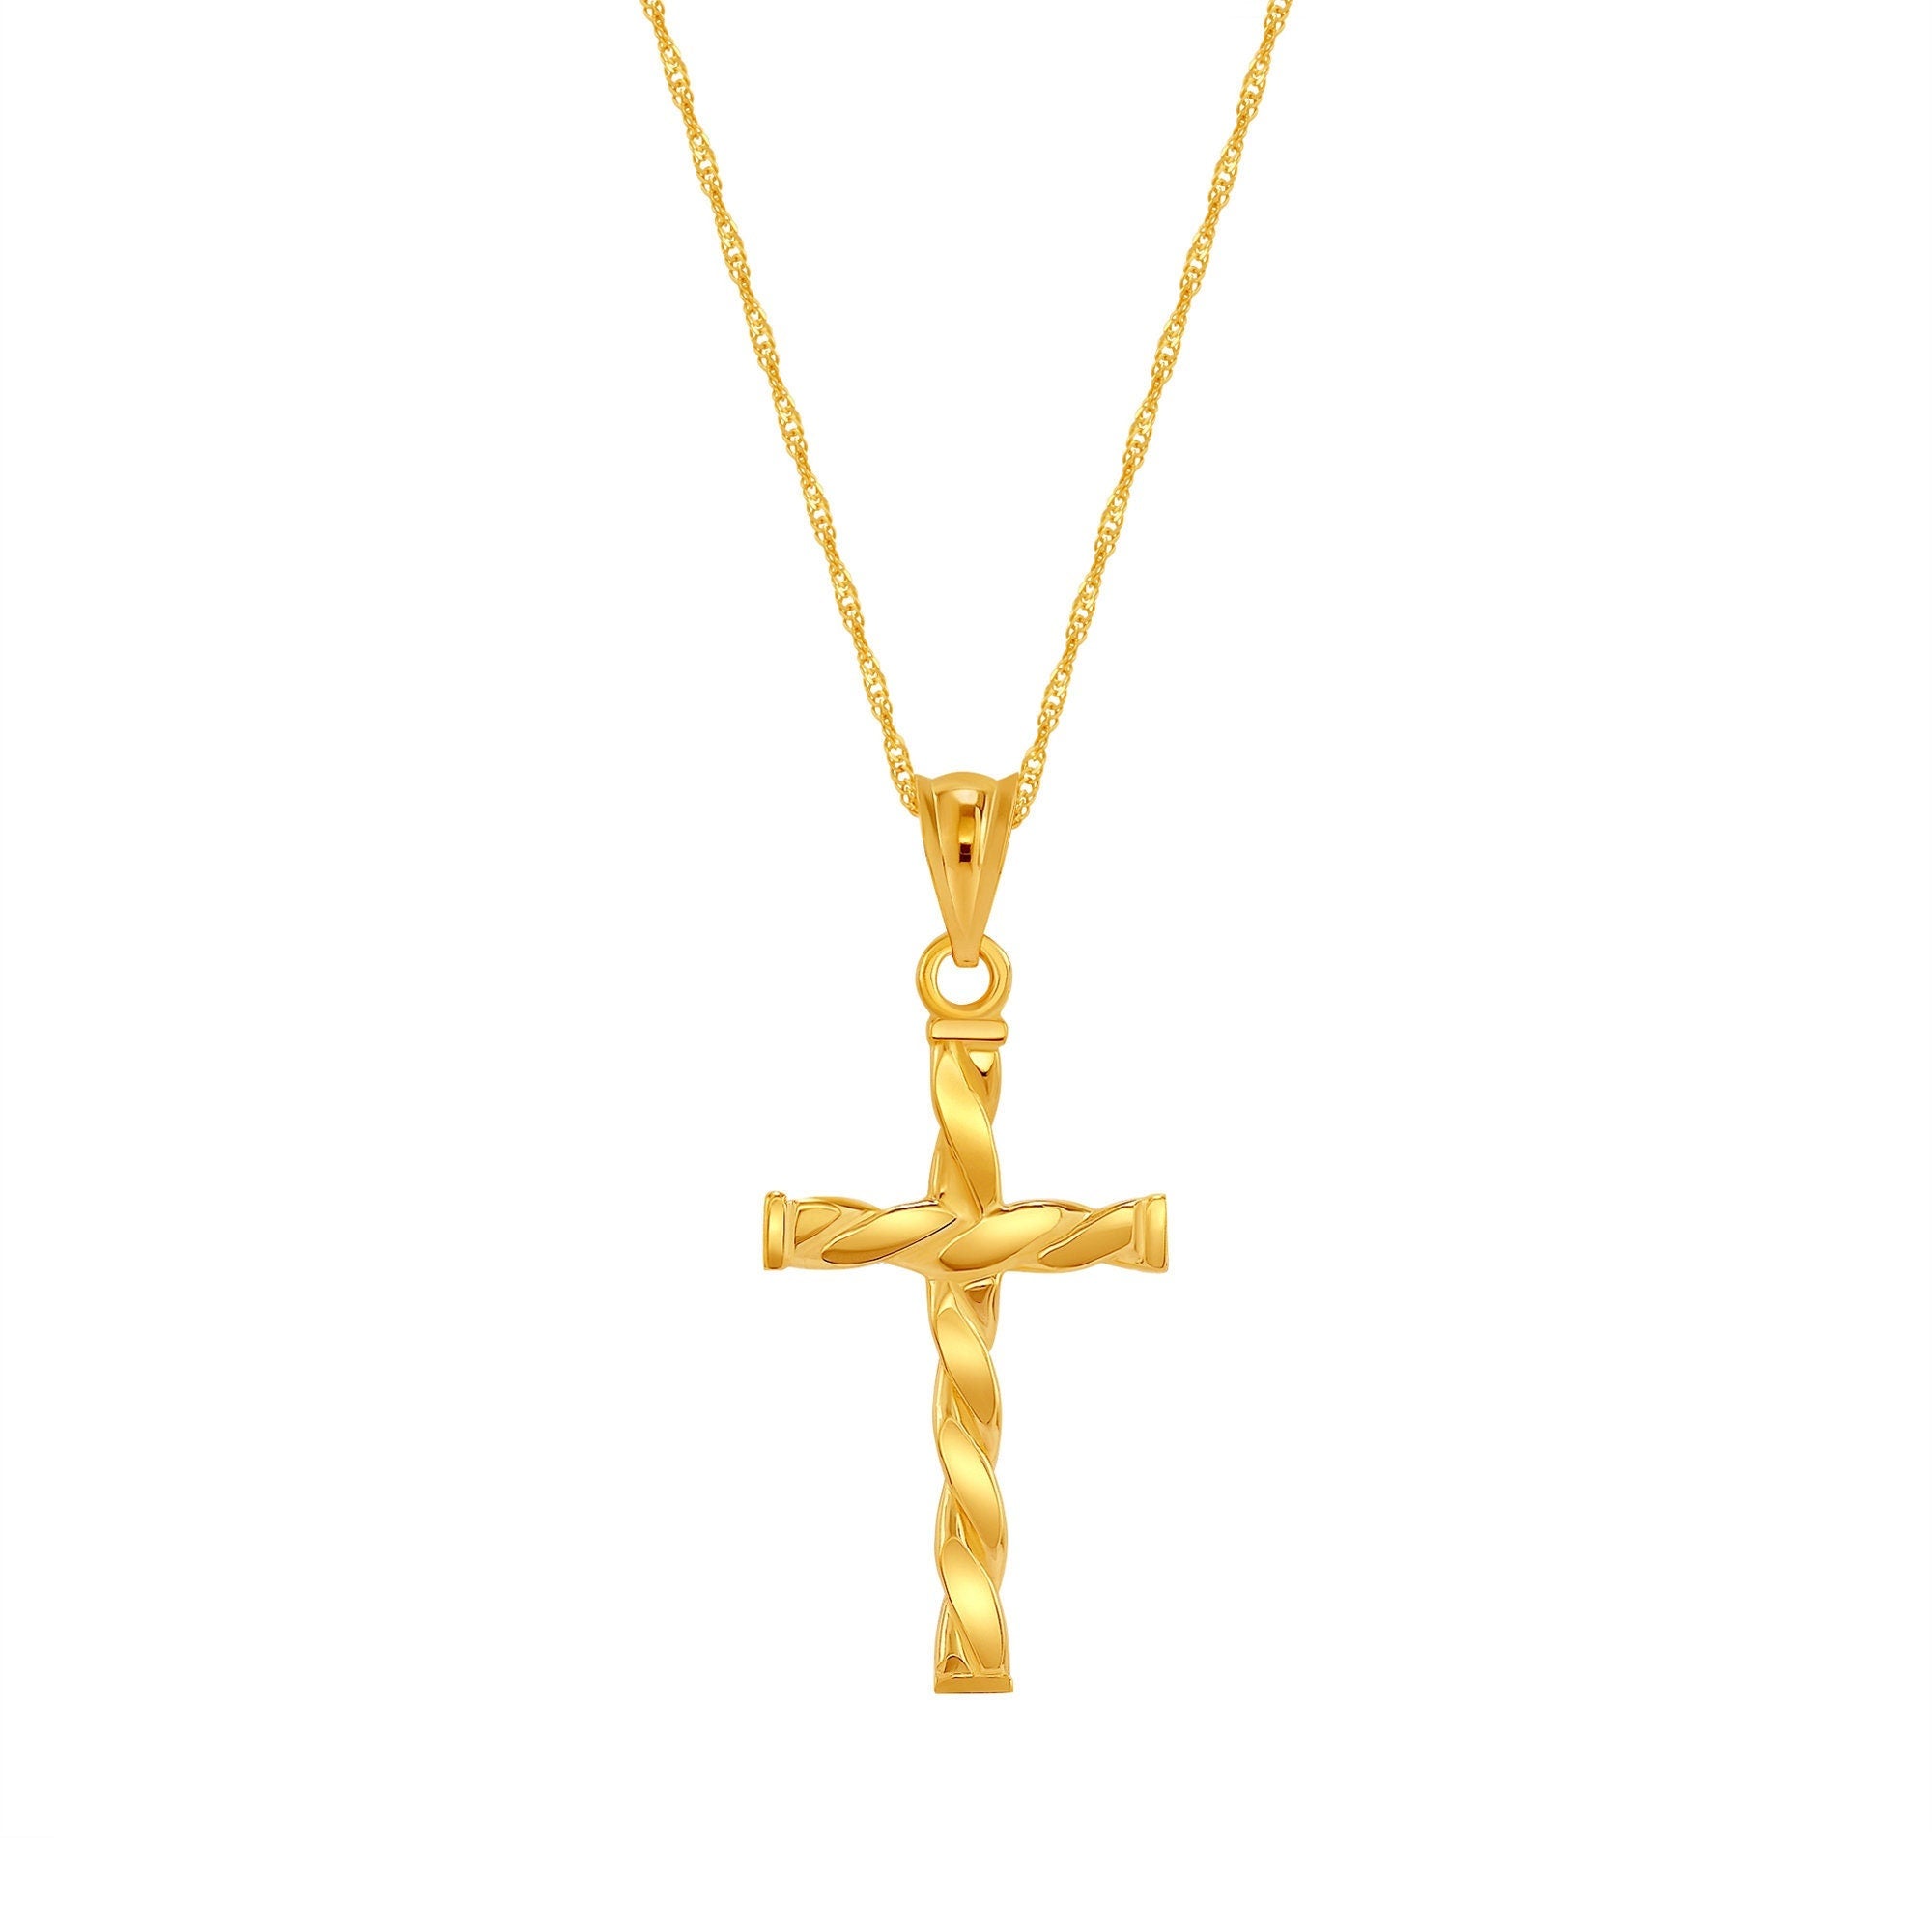 14k solid gold Twisted Cross 18" Necklace